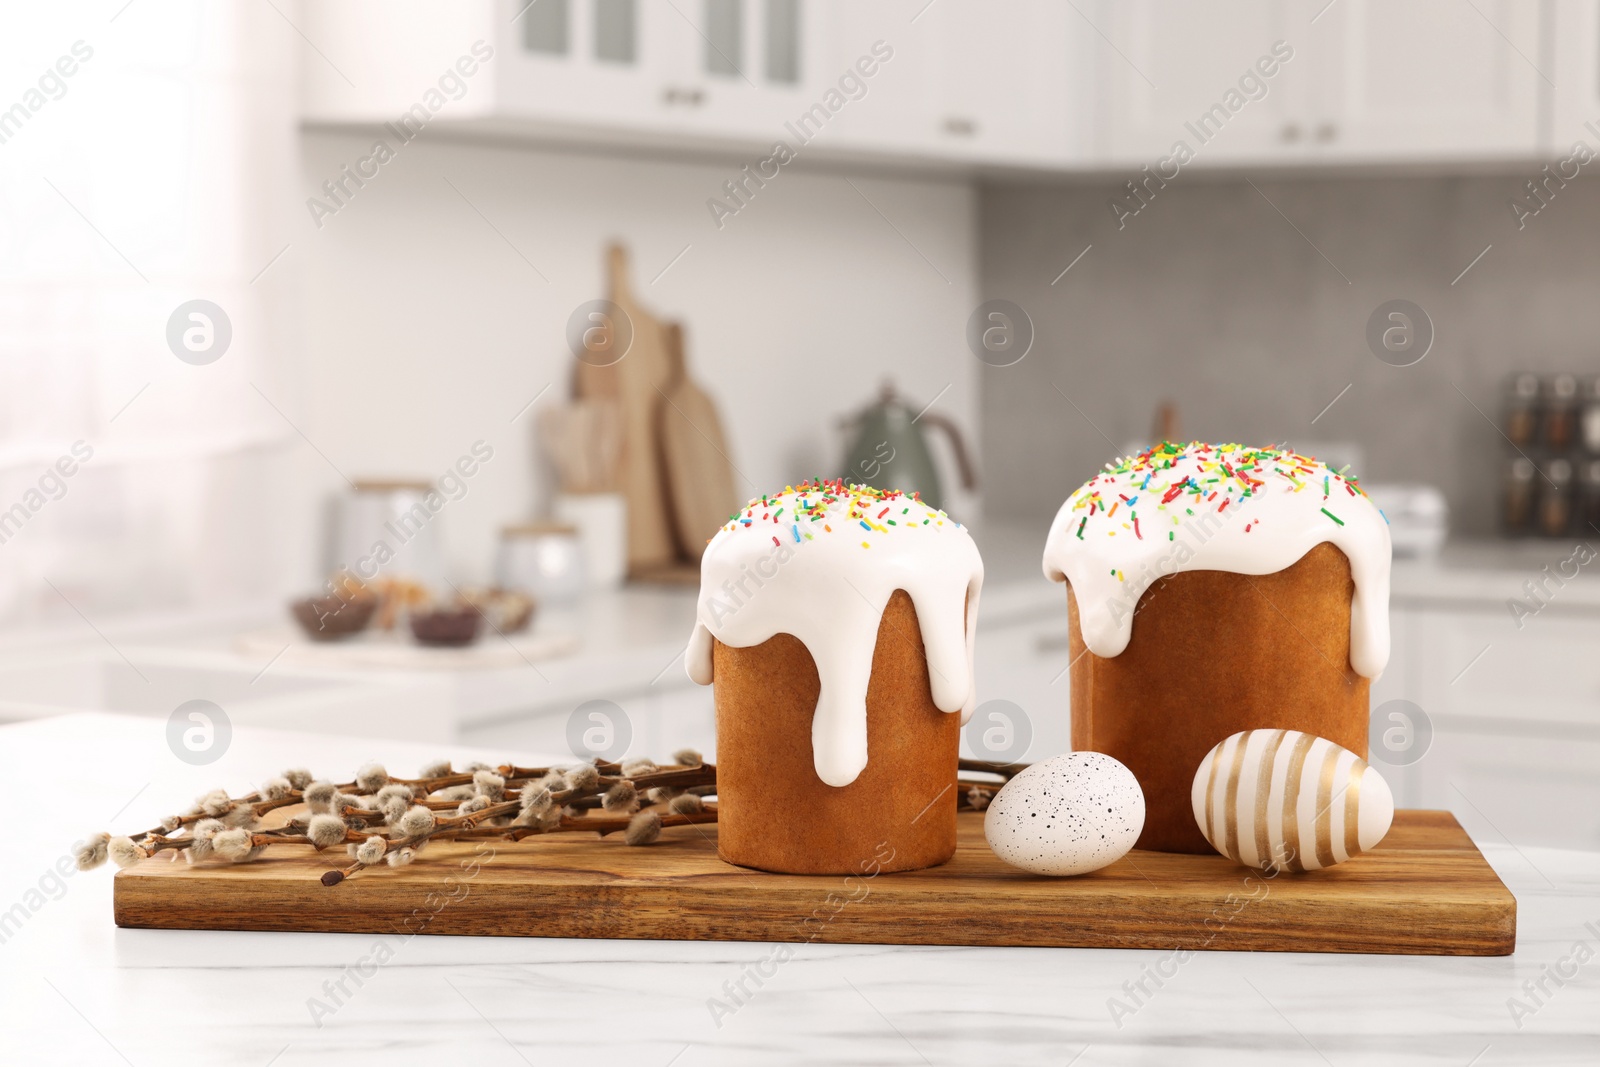 Photo of Delicious Easter cakes with sprinkles, decorated eggs and willow branches on white table in kitchen. Space for text